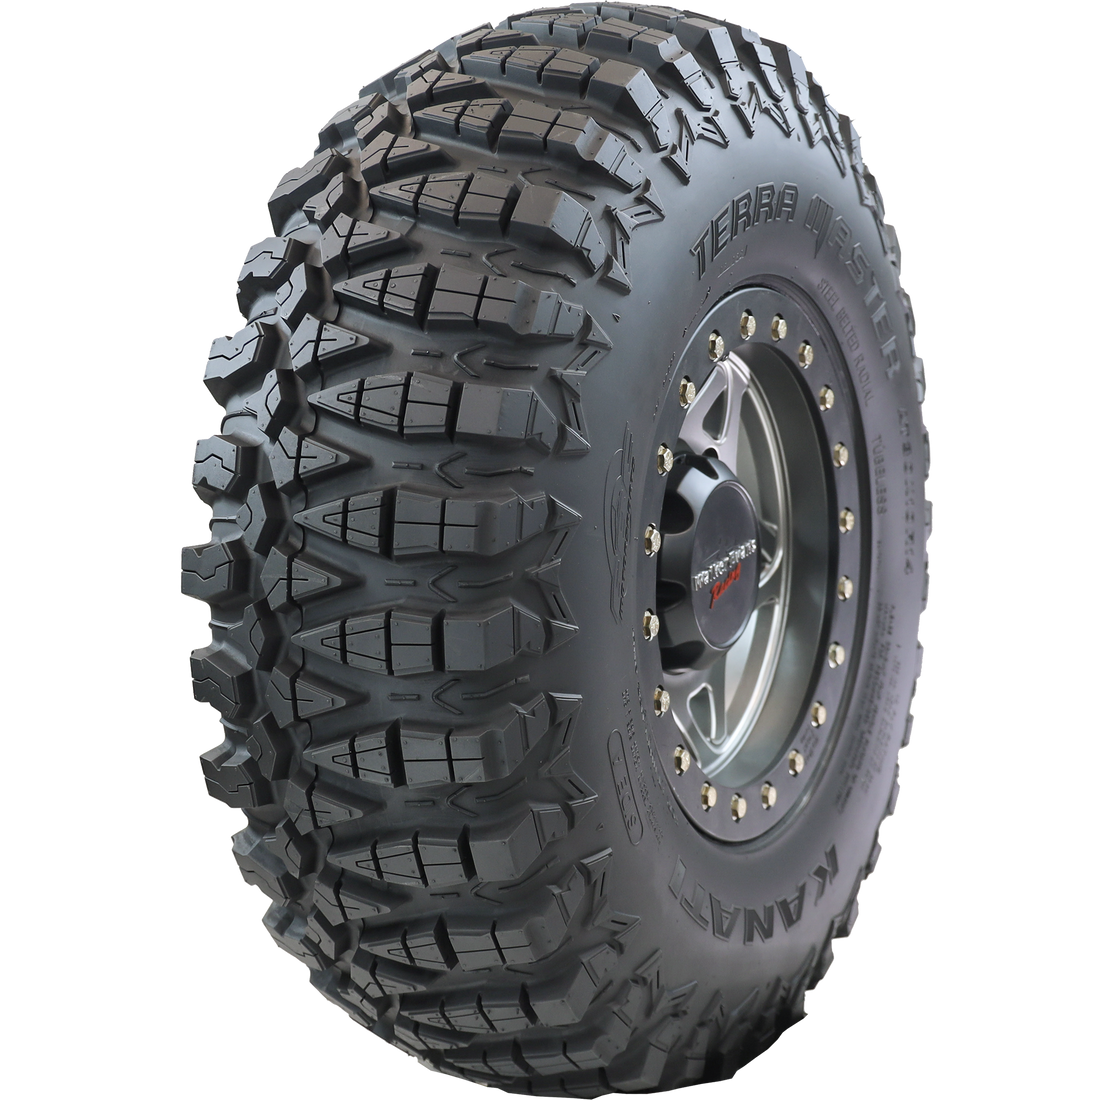 Angle view of Terra Master ATV/UTV tire, showing the tread, partial sidewall, and the rim. The image showcases the tire's profile optimized for fierce straight-line traction, and side bite offering greater control during cornering, ensuring a high-performance ride in varied terrains.